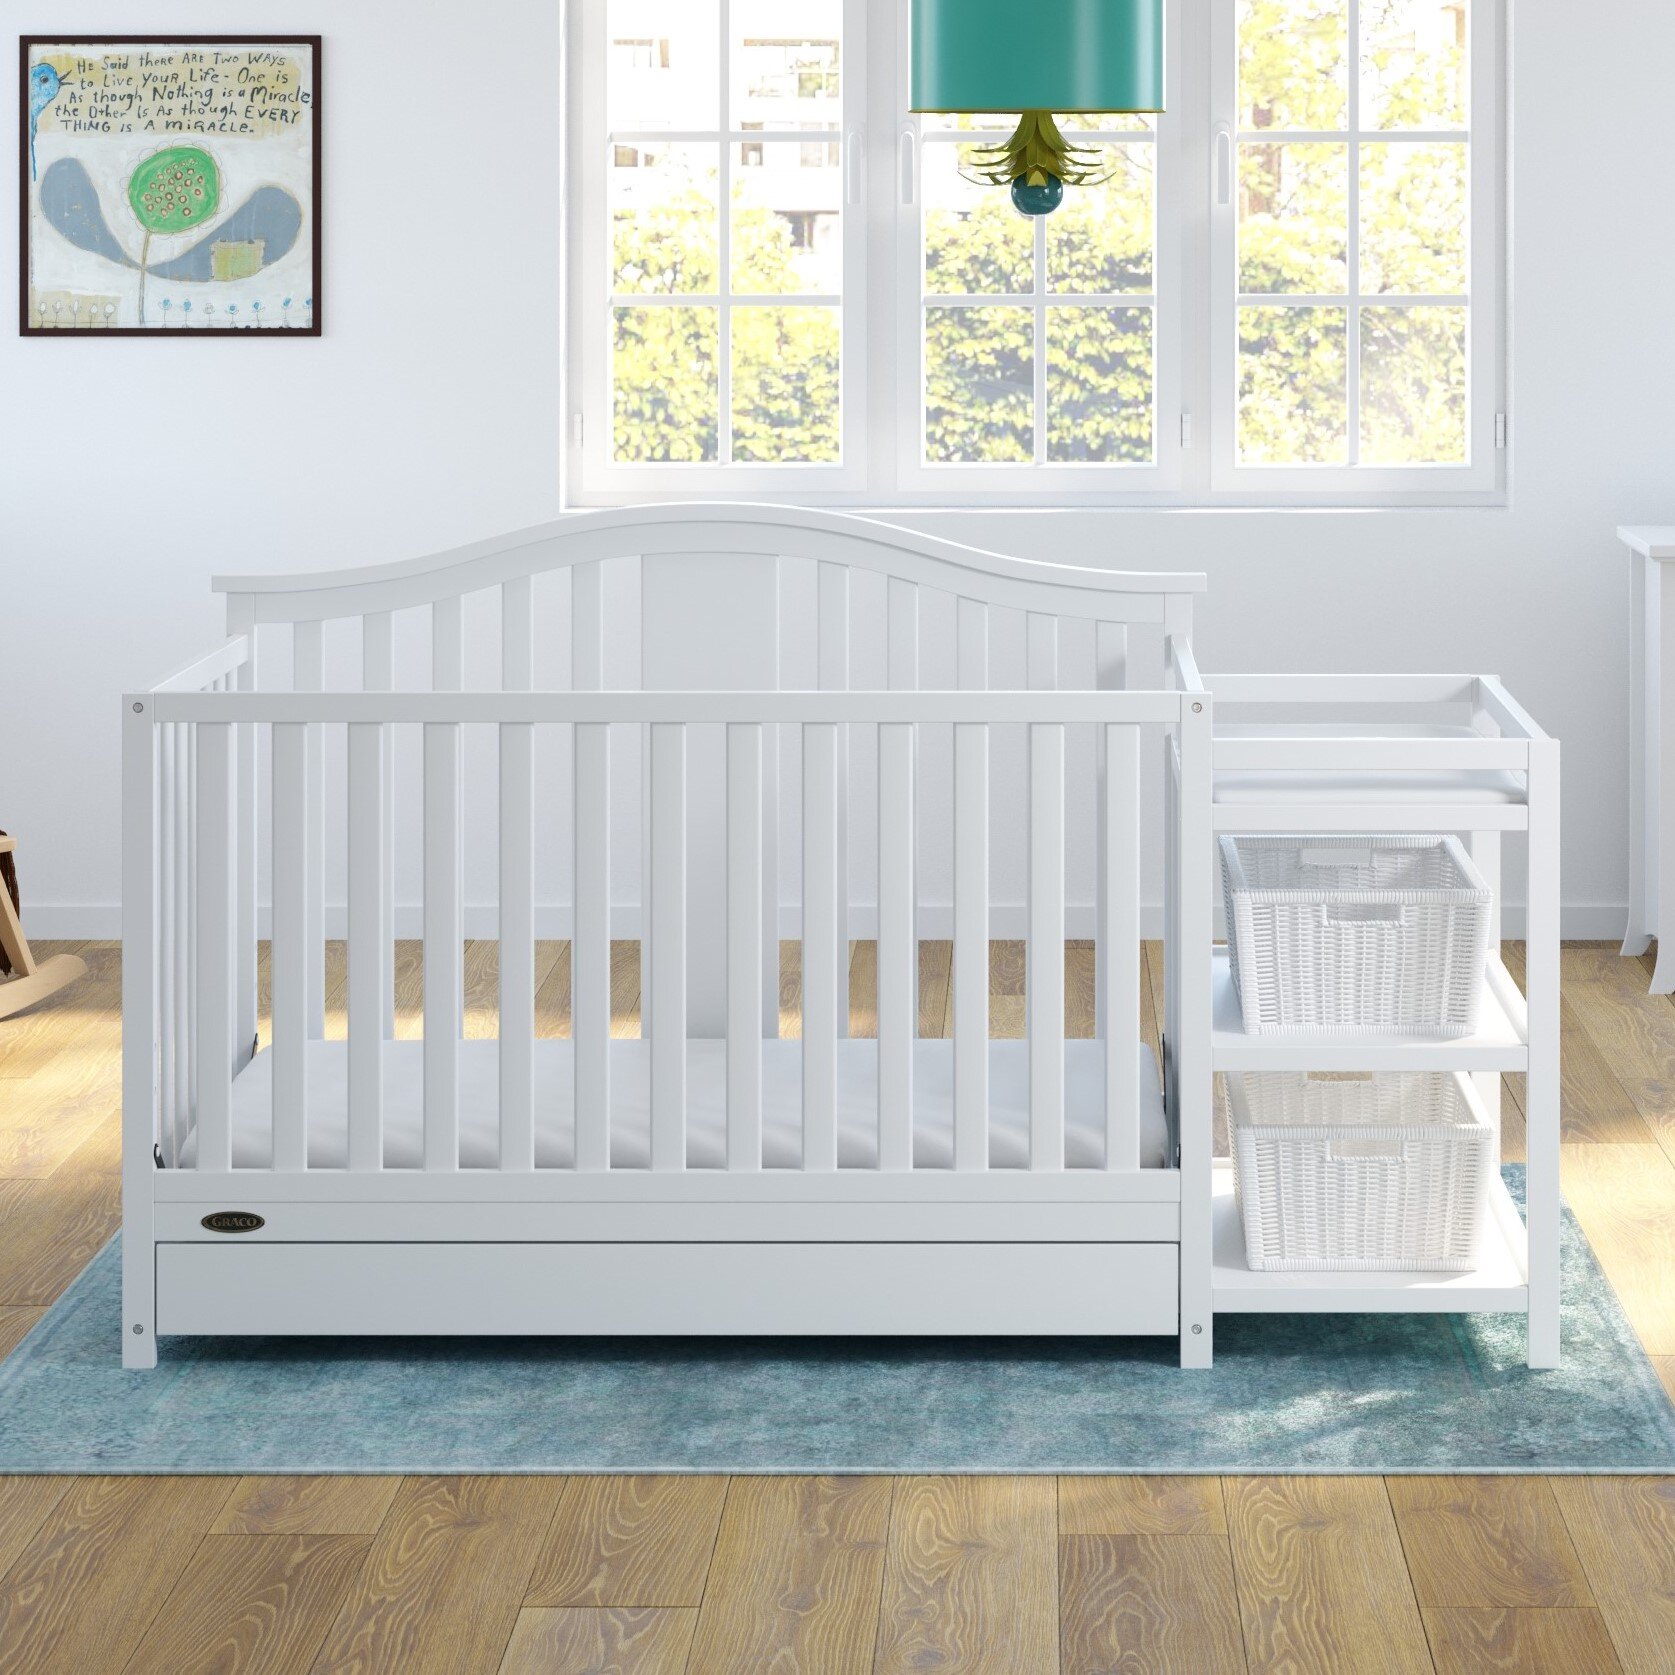 Assembly Required Three Position Adjustable Height Mattress Graco Solano 4-in-1 Convertible Crib with Drawer Mattress Not Included Pebble Gray Easily Converts to Toddler Bed Day Bed or Full Bed 